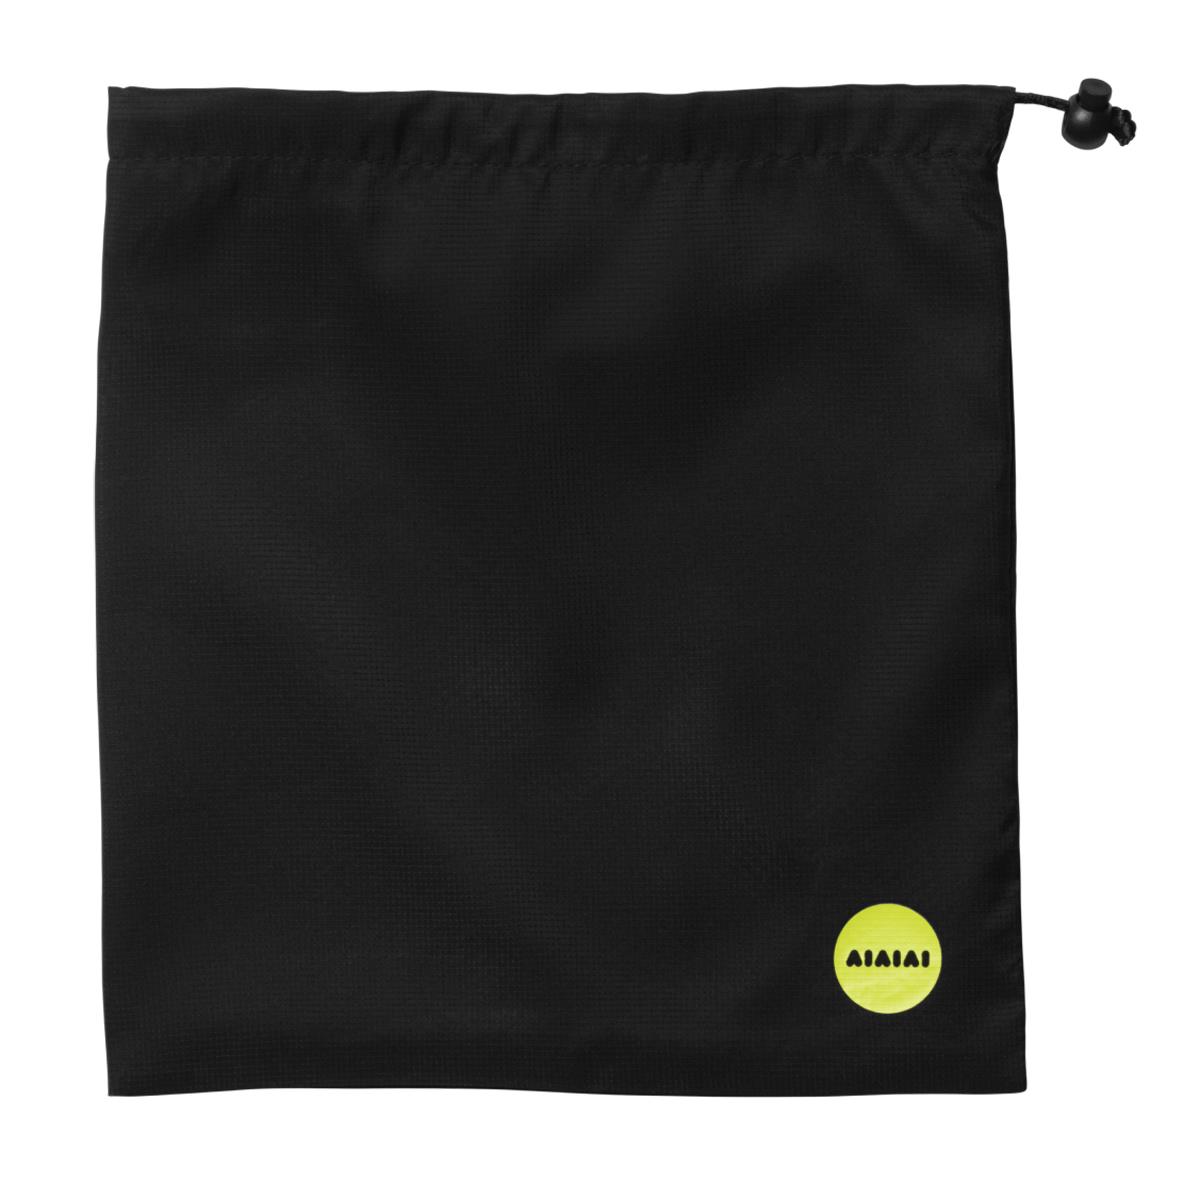 Image of AIAIAI A01 Protective Pouch